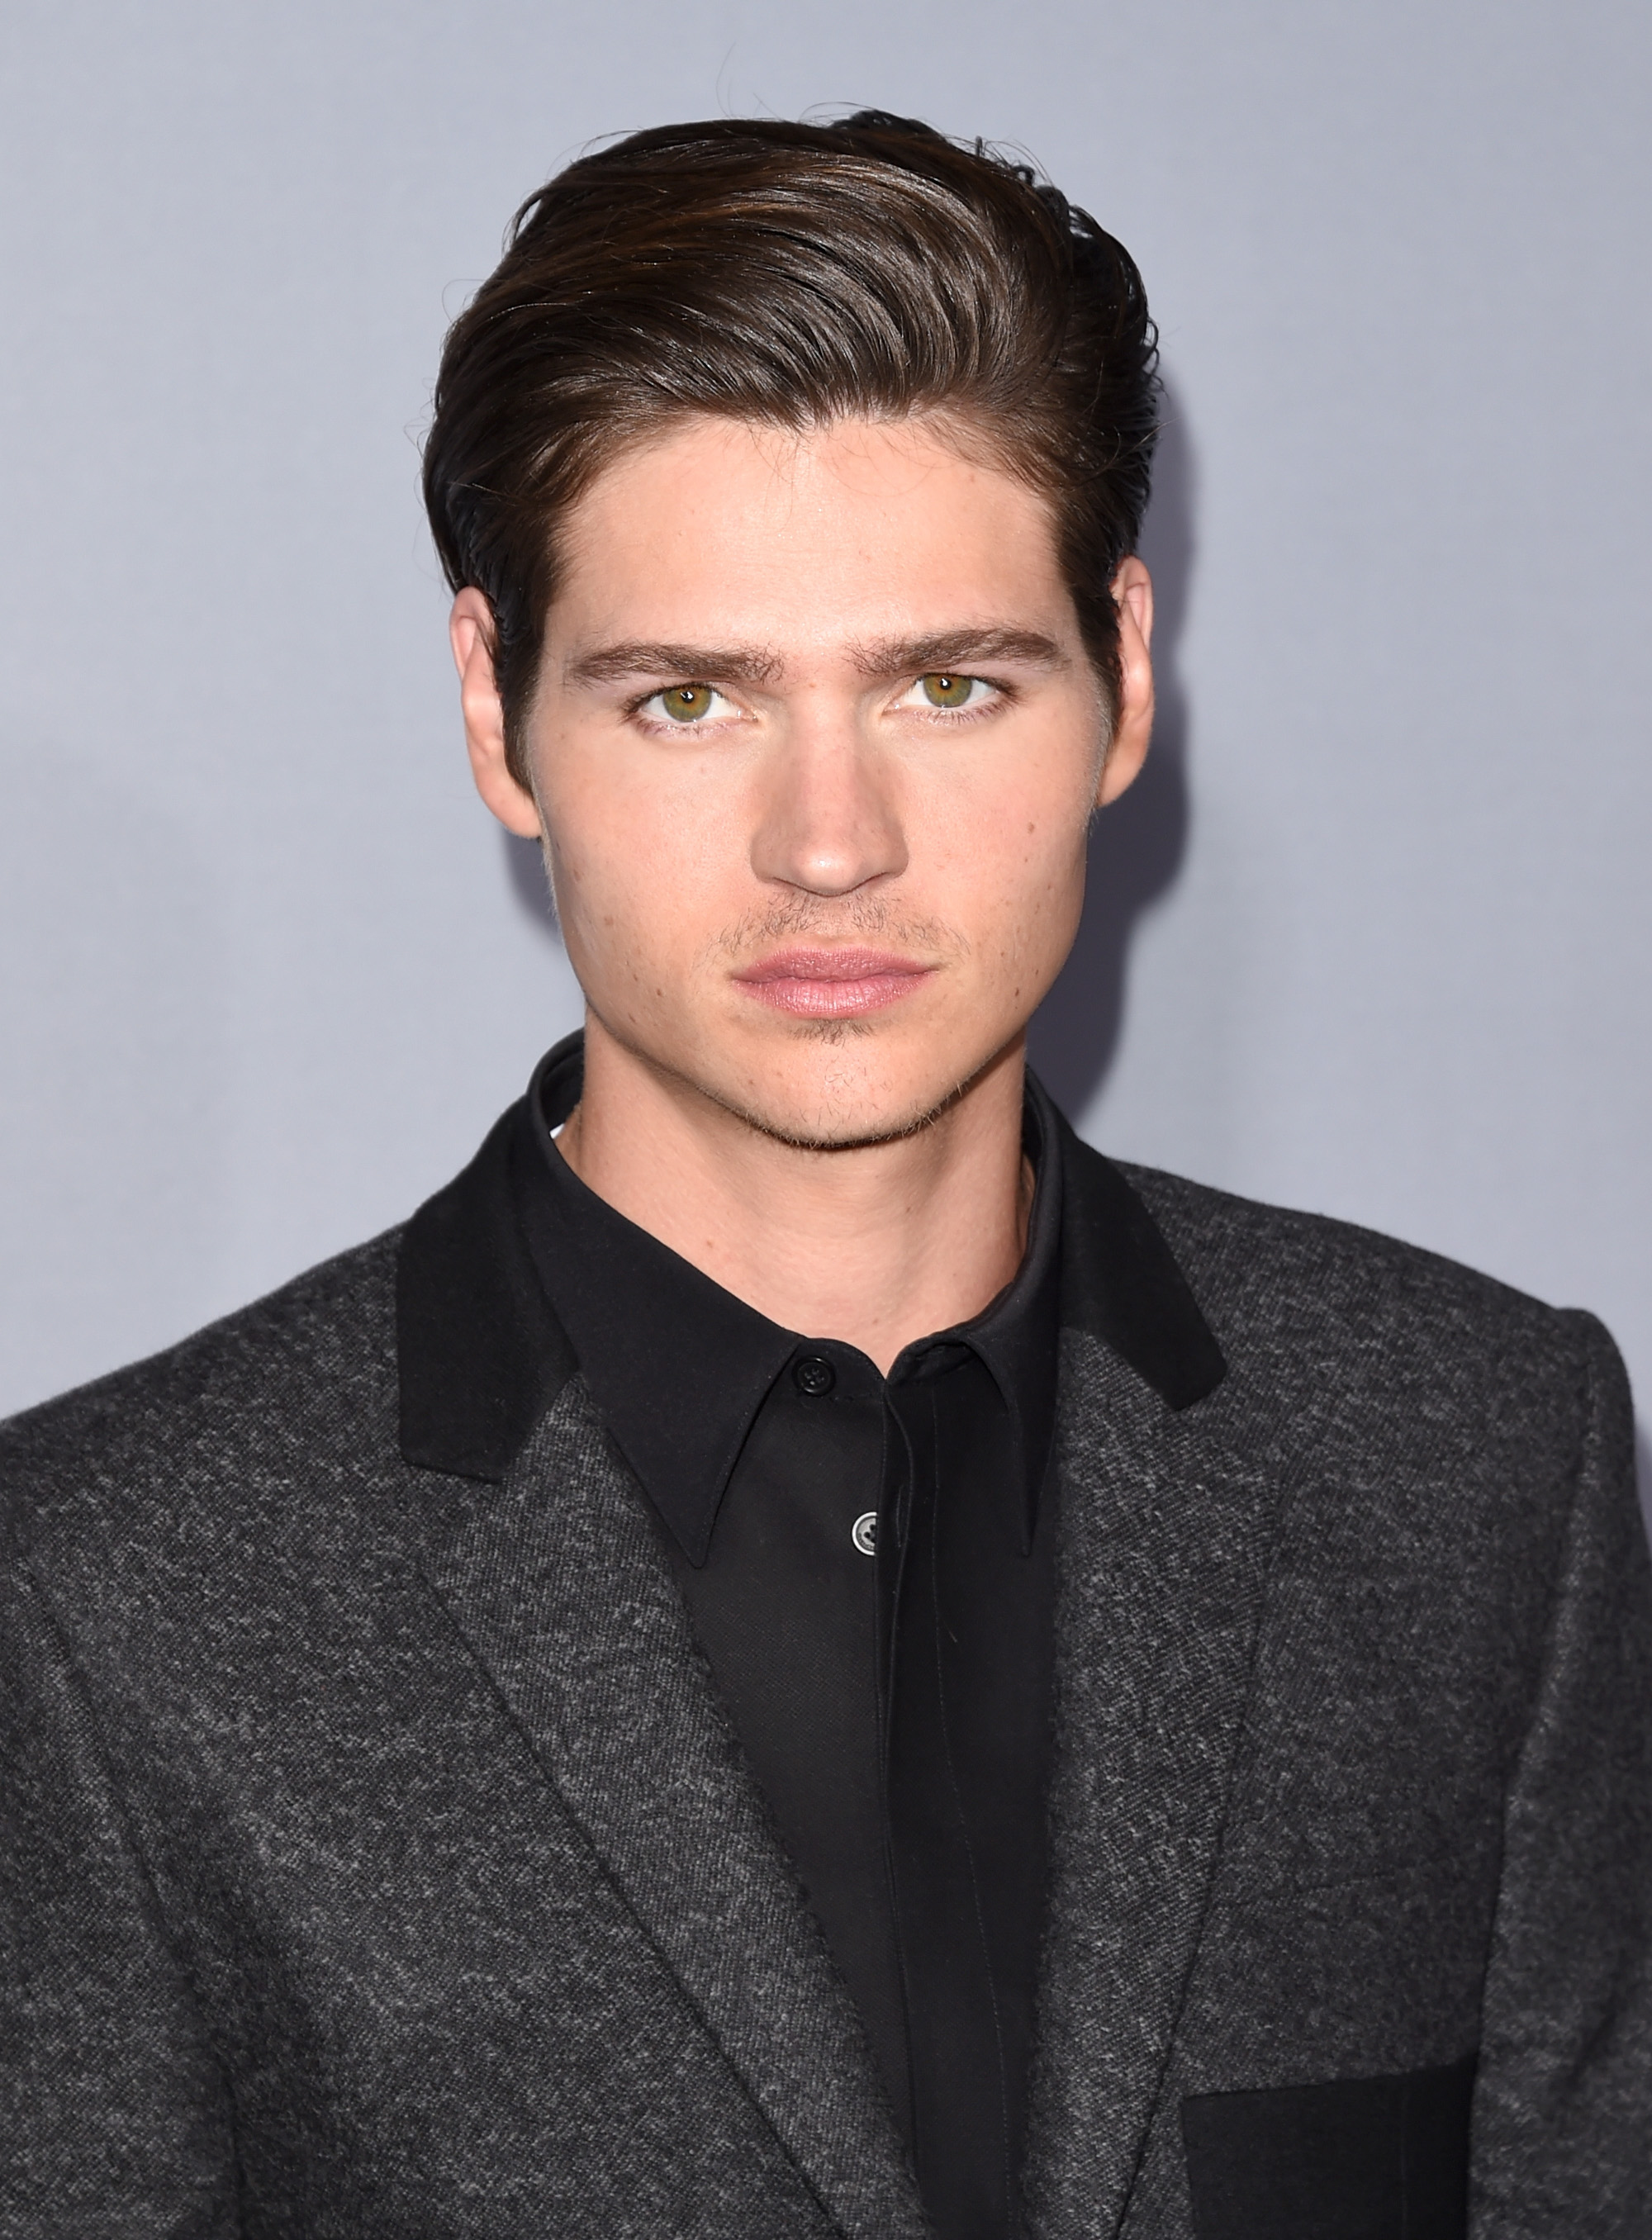 Actor Will Peltz attends the InStyle Awards at Getty Center on October 26, 2015 in Los Angeles, California.